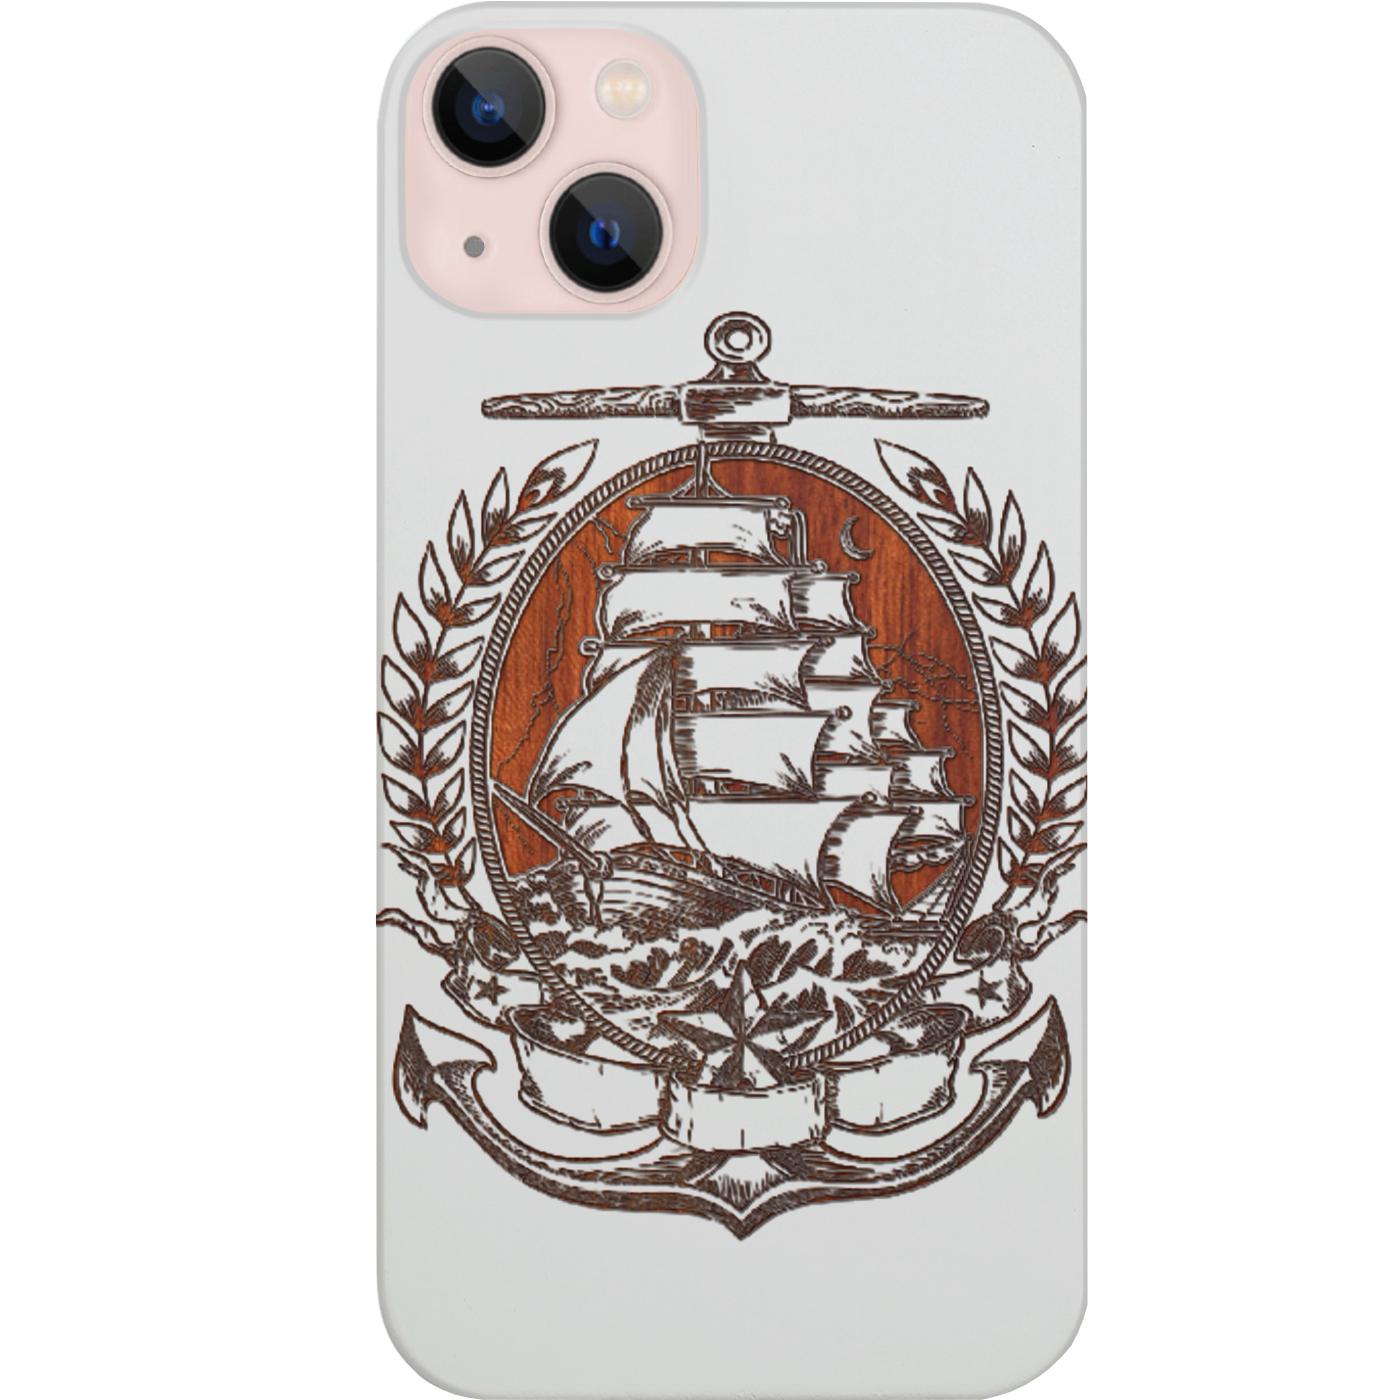 Pirate Ship in Crest - Engraved Phone Case